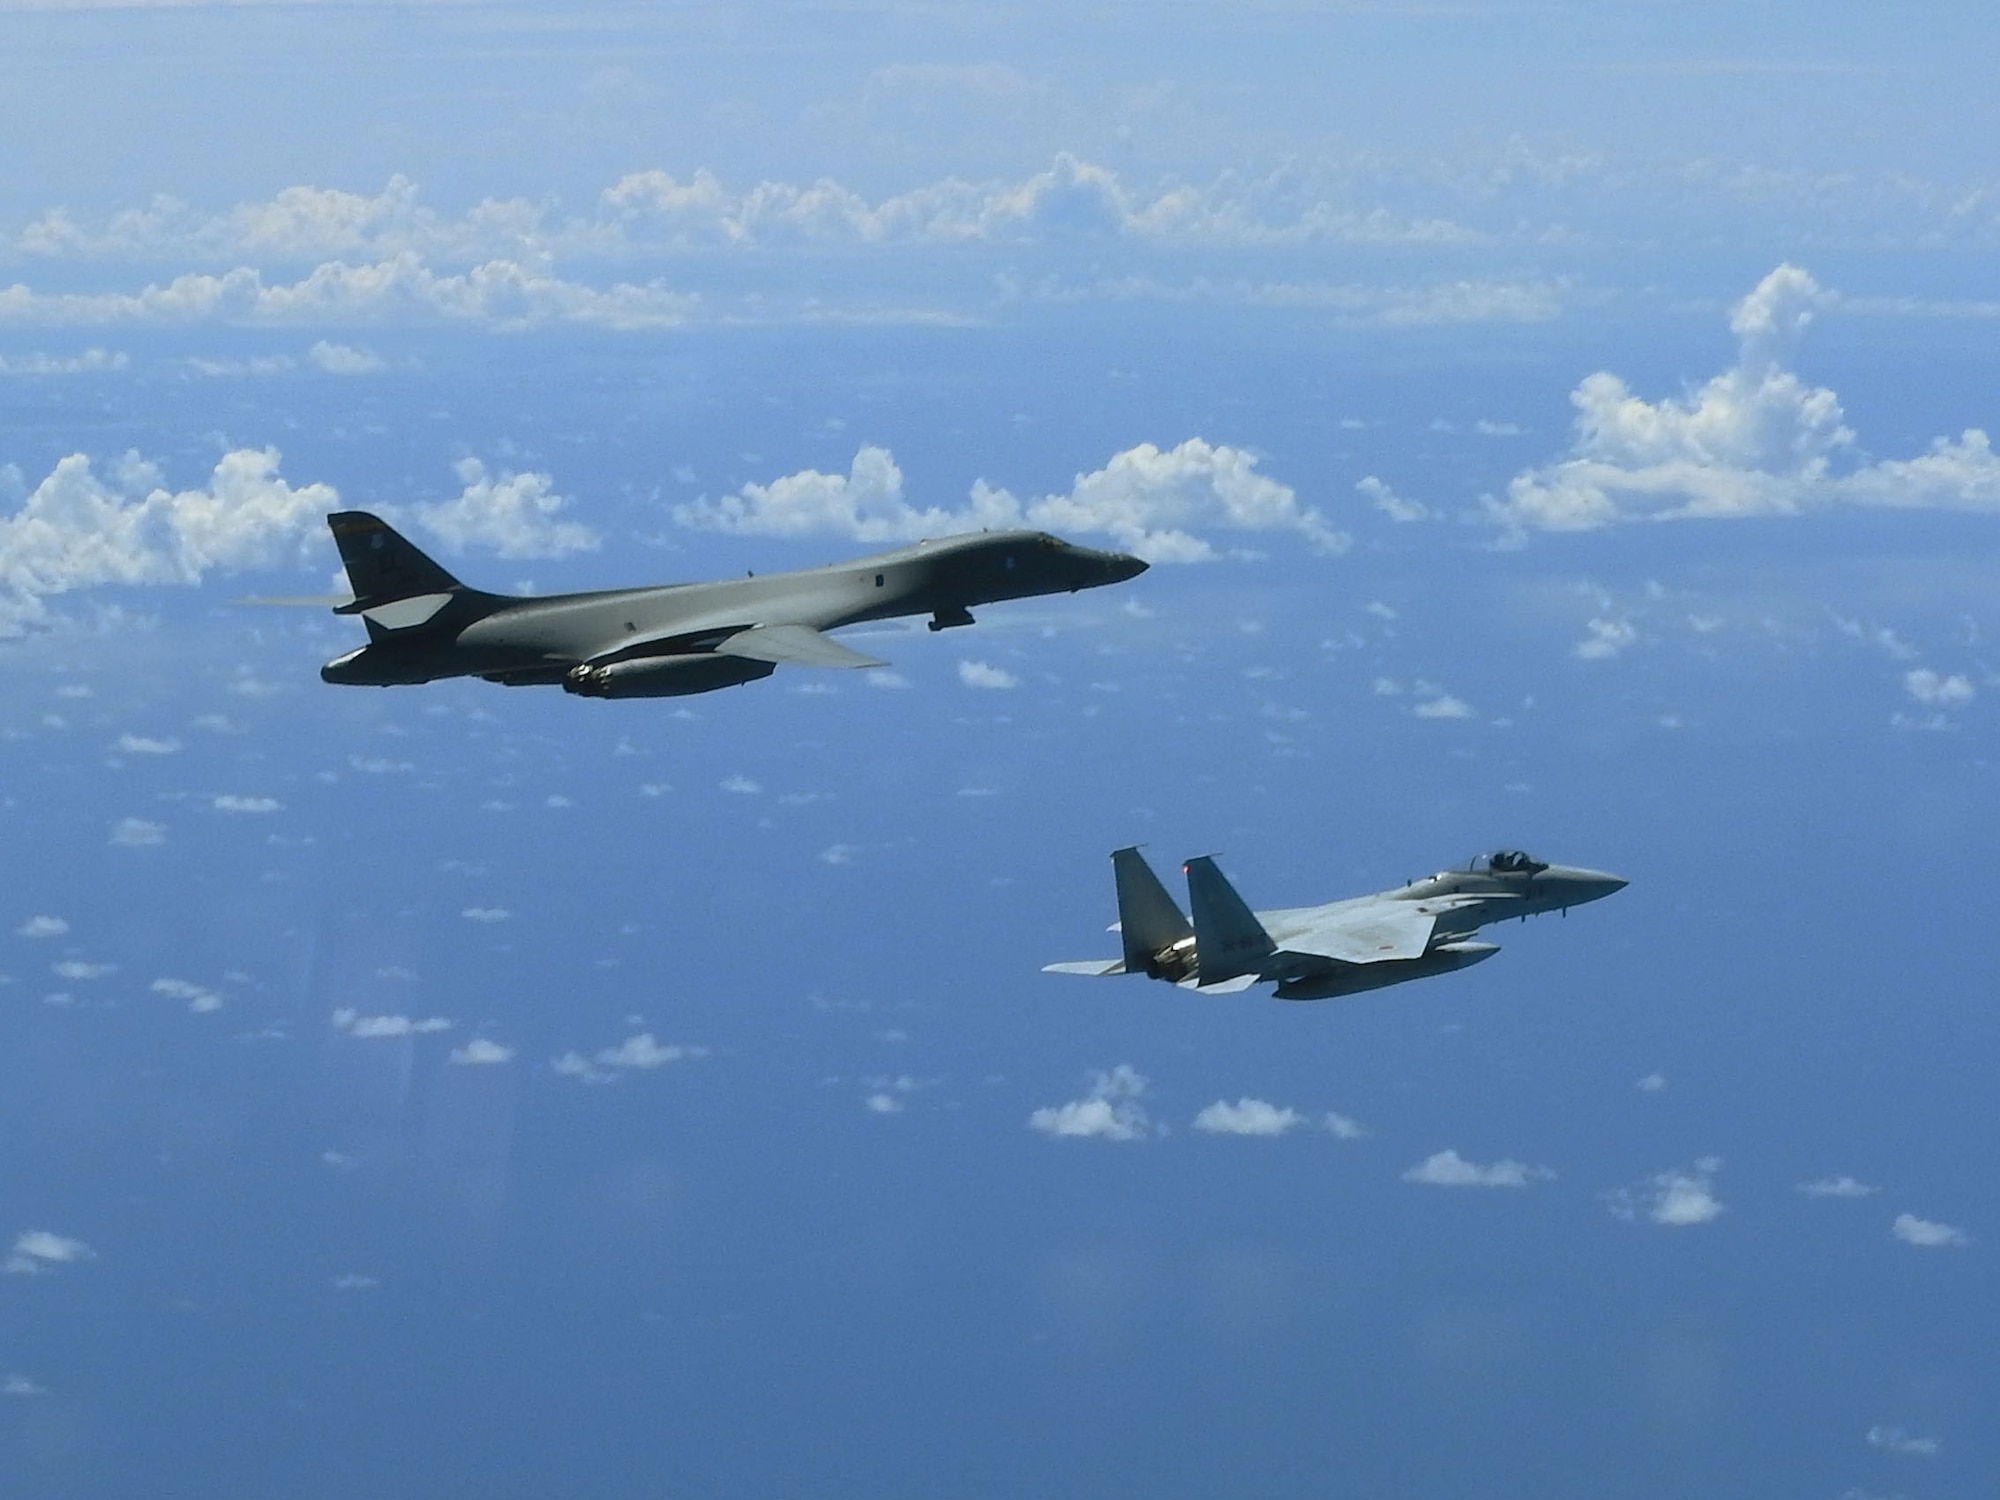 A B-1B Lancer conducts integration training with the Koku-Jieitai, or Japanese Air Self-Defense Force (JASDF) in the vicinity of Japan, Aug.  27, 2020. The B-1s integrated with Koku-Jietai to enhance bilateral interoperability and mutual readiness between the U.S. and Japan. (Photo Courtesy of JASDF)